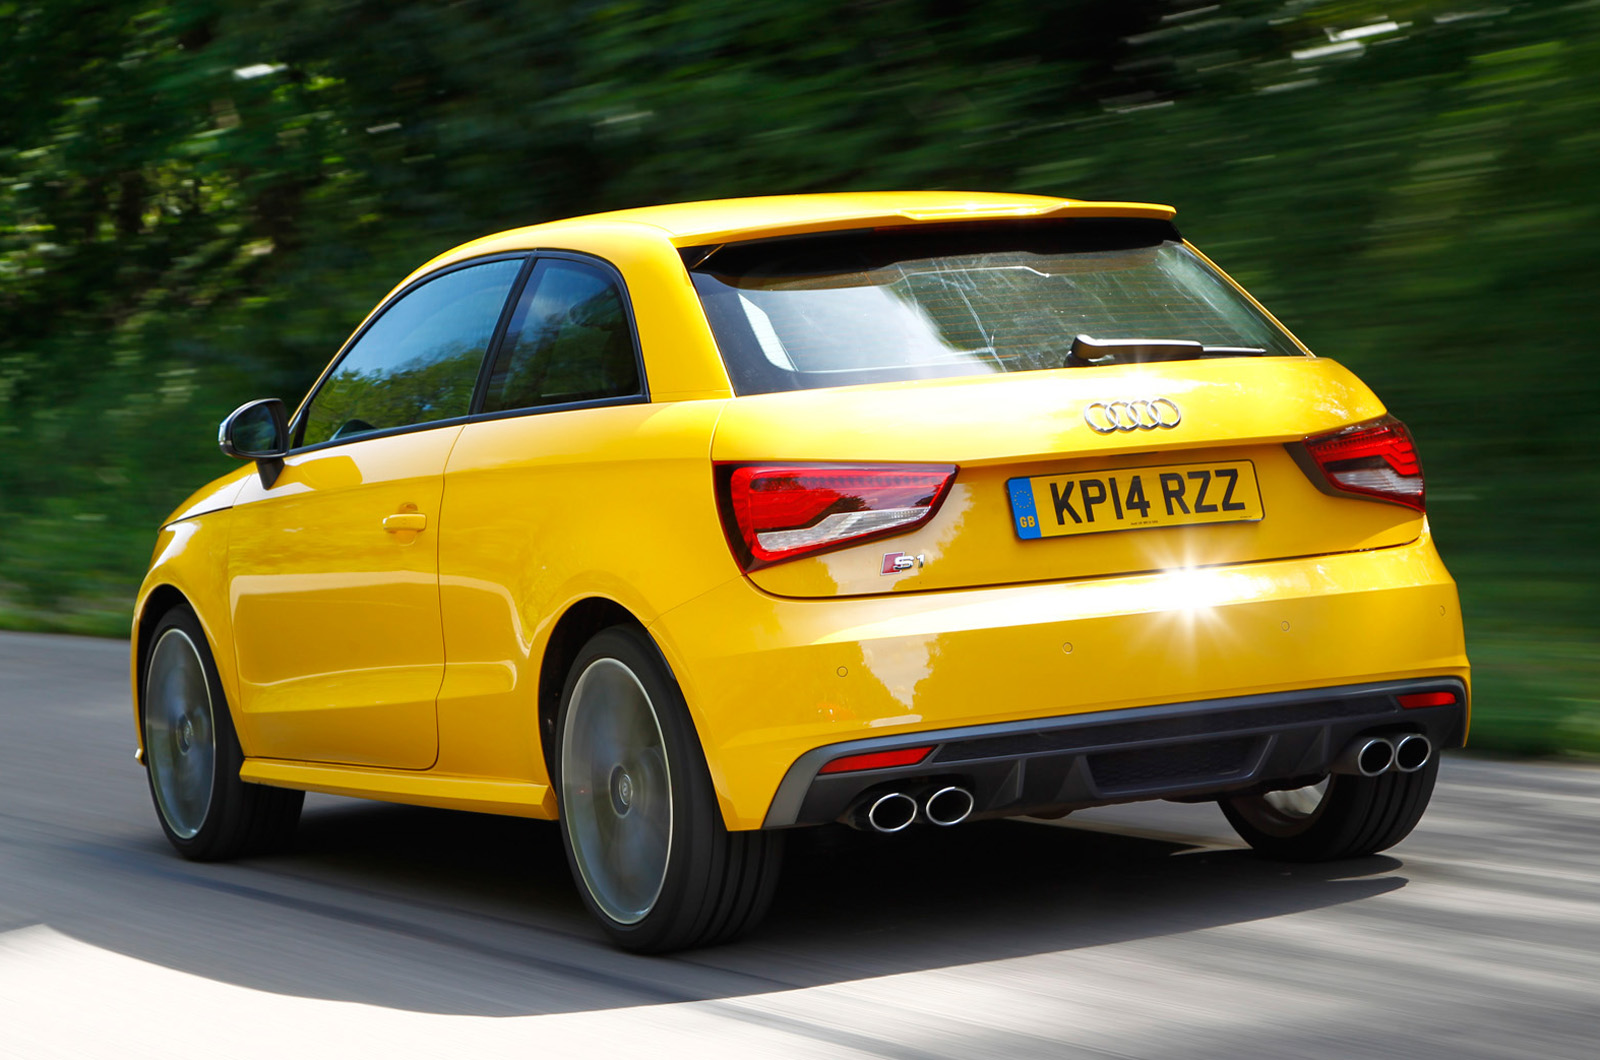 The fast Audi S1